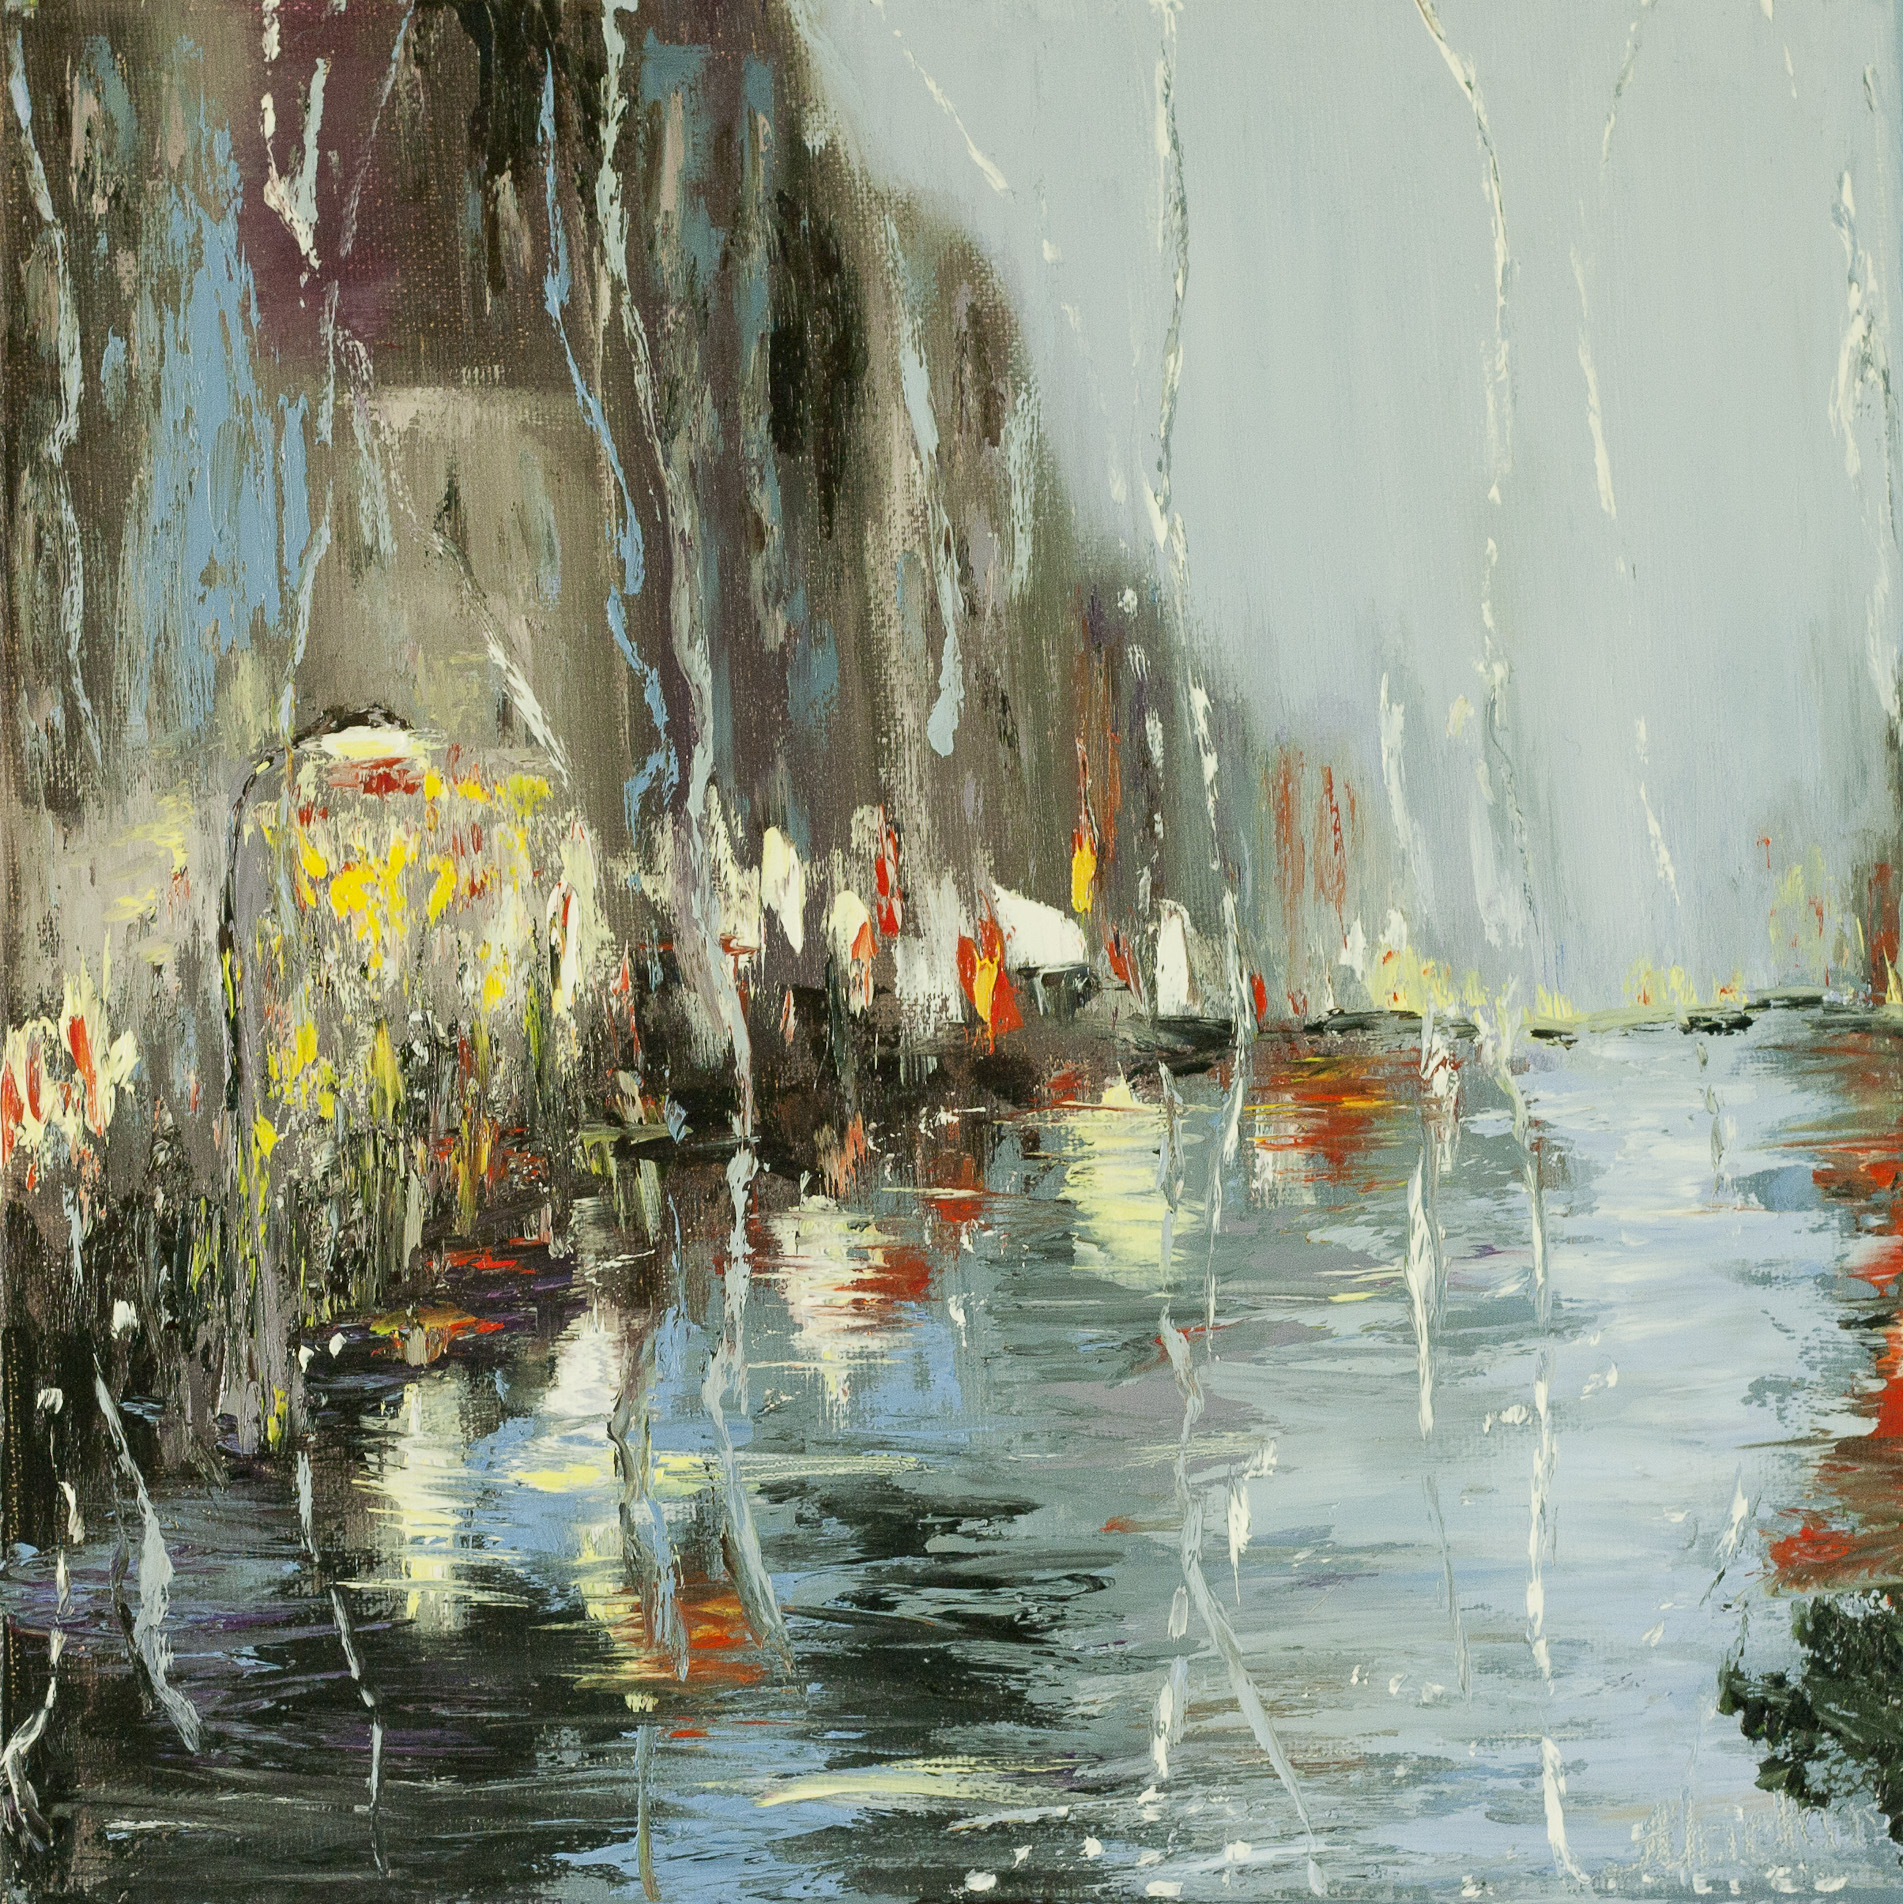 Rainy night in the city. | I Learn Painting